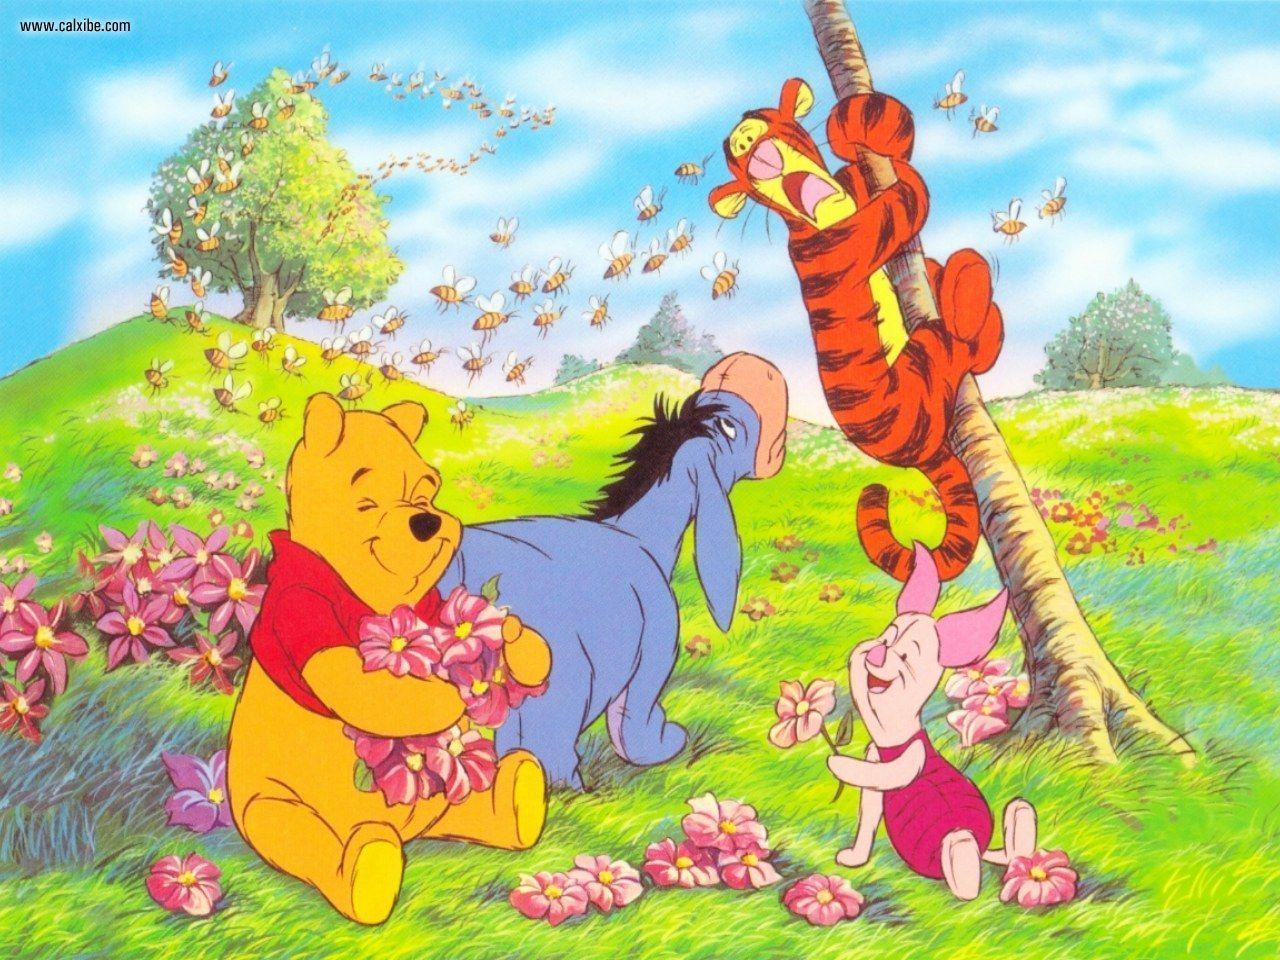 Winnie the Pooh HD Wallpaper Image for MacBook